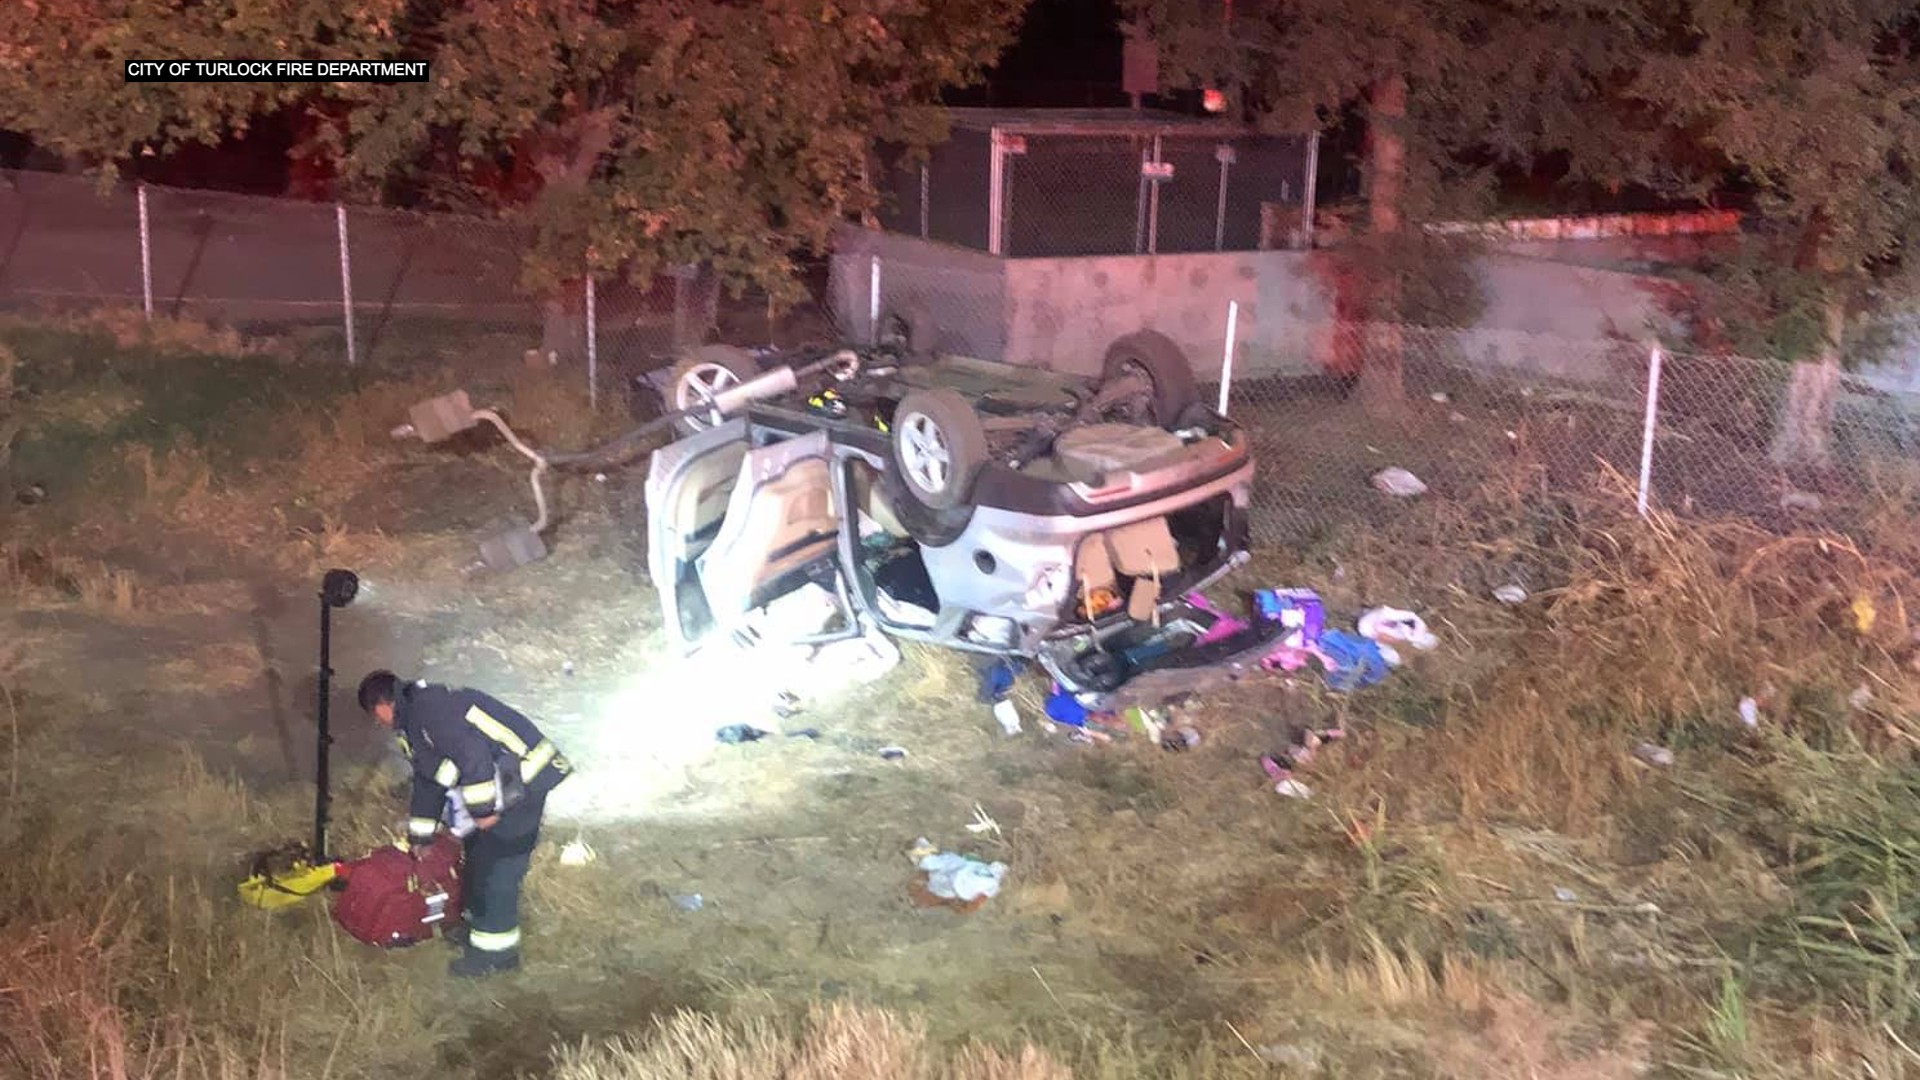 Man Suspected Of DUI In Turlock Crash That Killed His Wife And Sent Their 4 Children To The Hospital